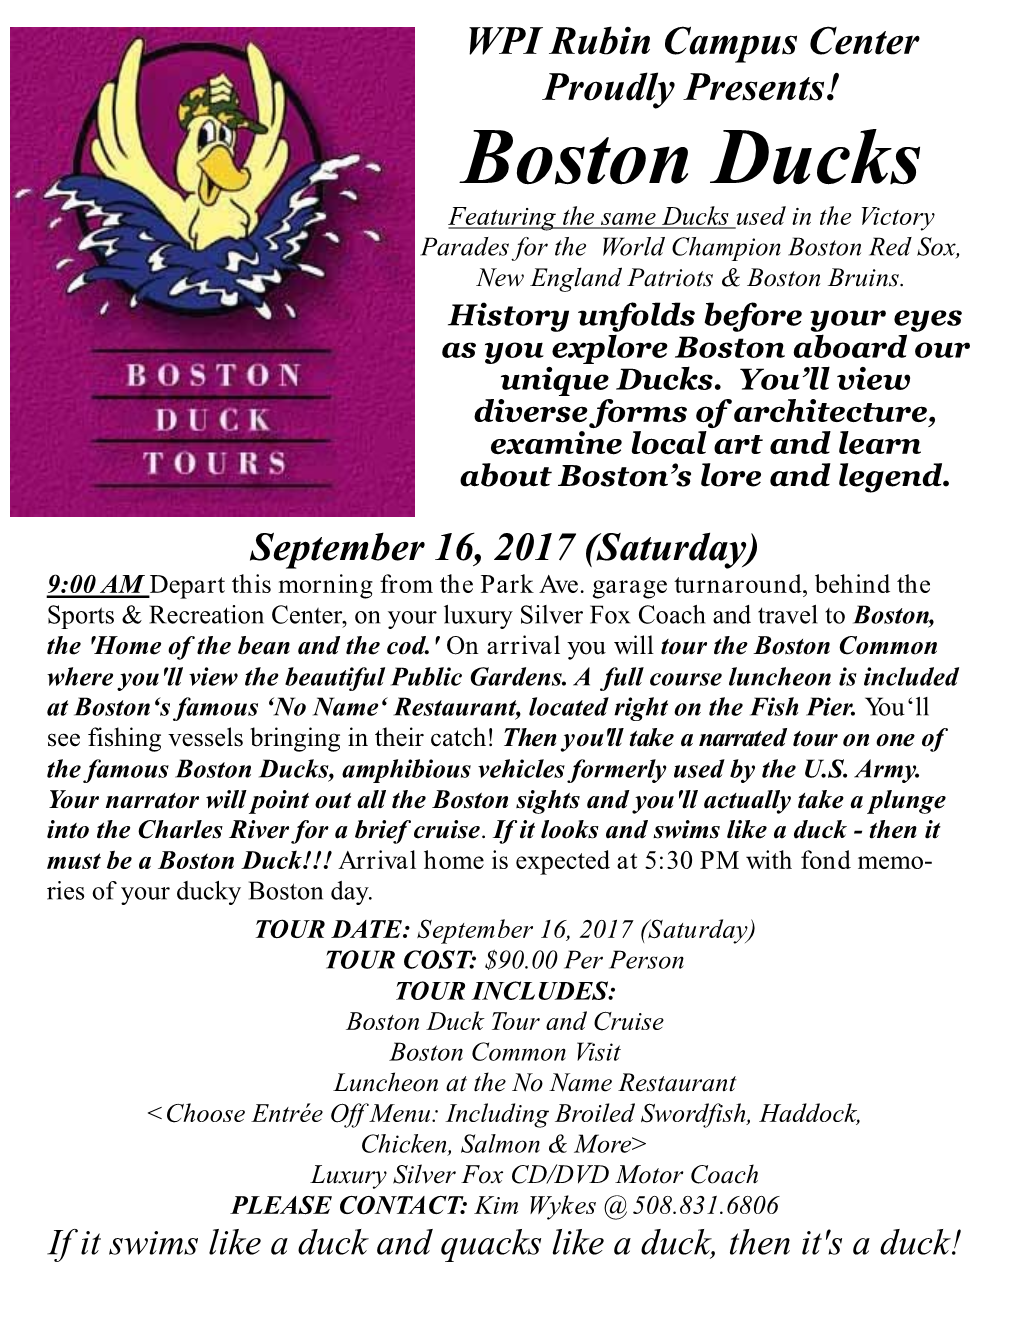 Boston Ducks Featuring the Same Ducks Used in the Victory Parades for the World Champion Boston Red Sox, New England Patriots & Boston Bruins